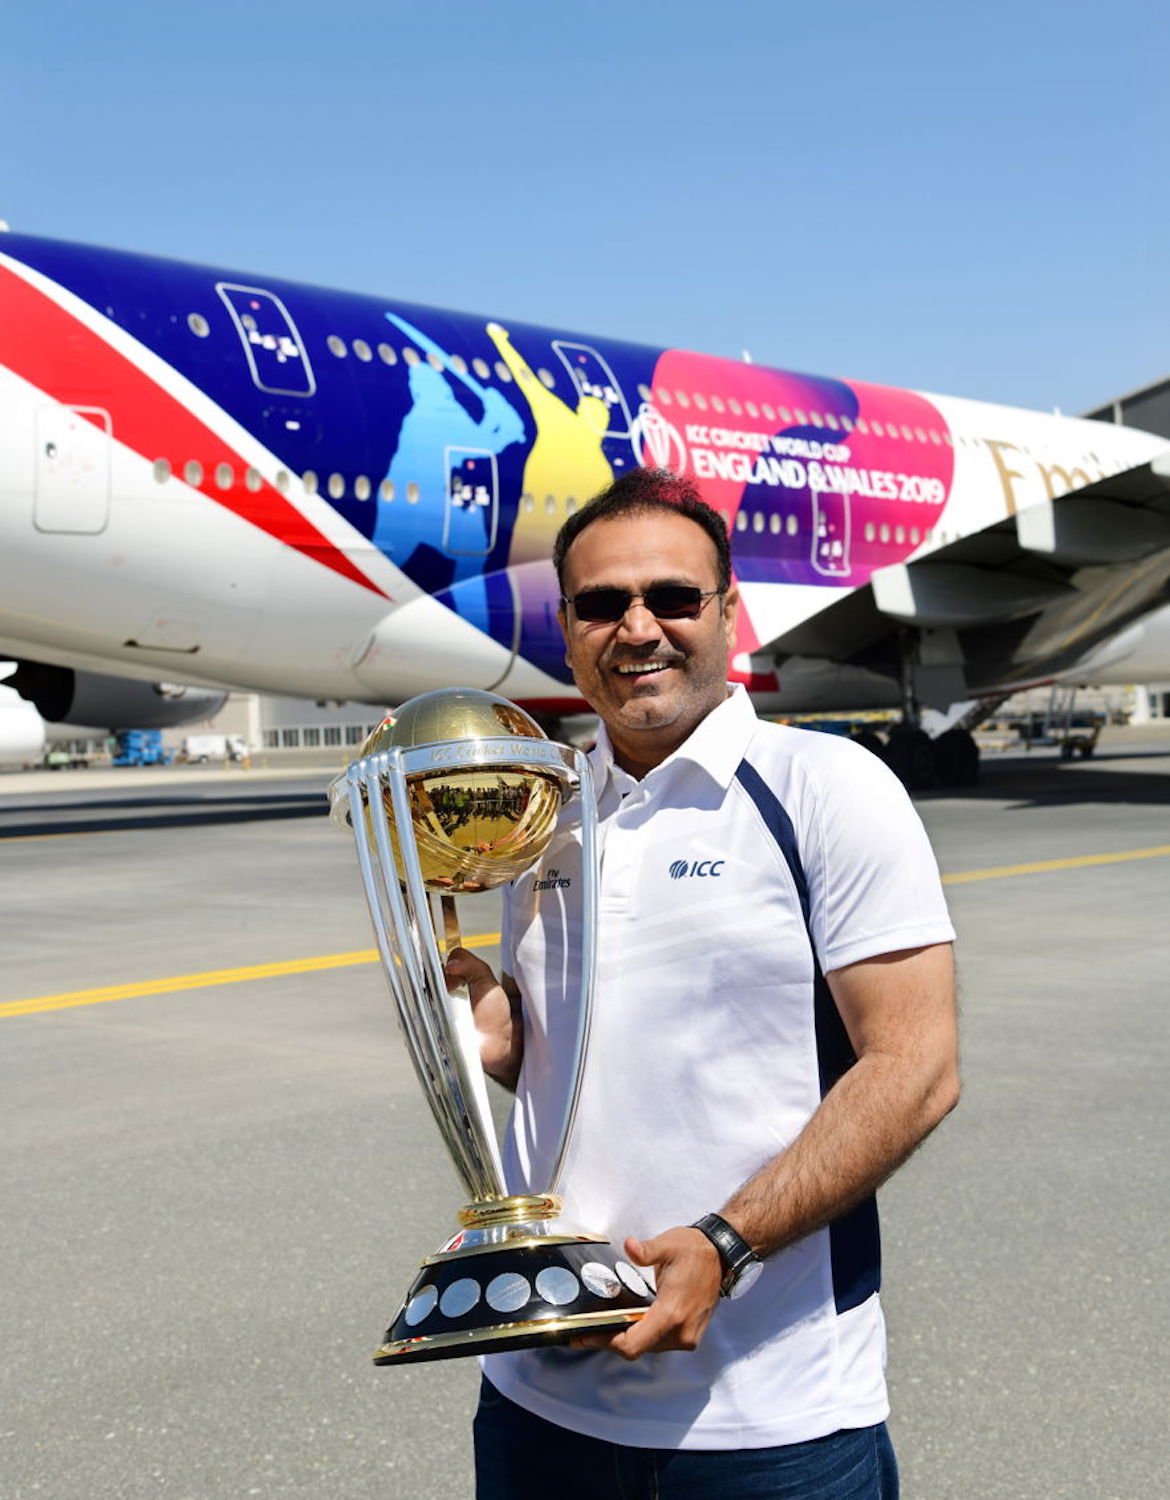 Indian cricketer Virender Sehwag with the International Cricket Council World Cup trophy. (Emirates)